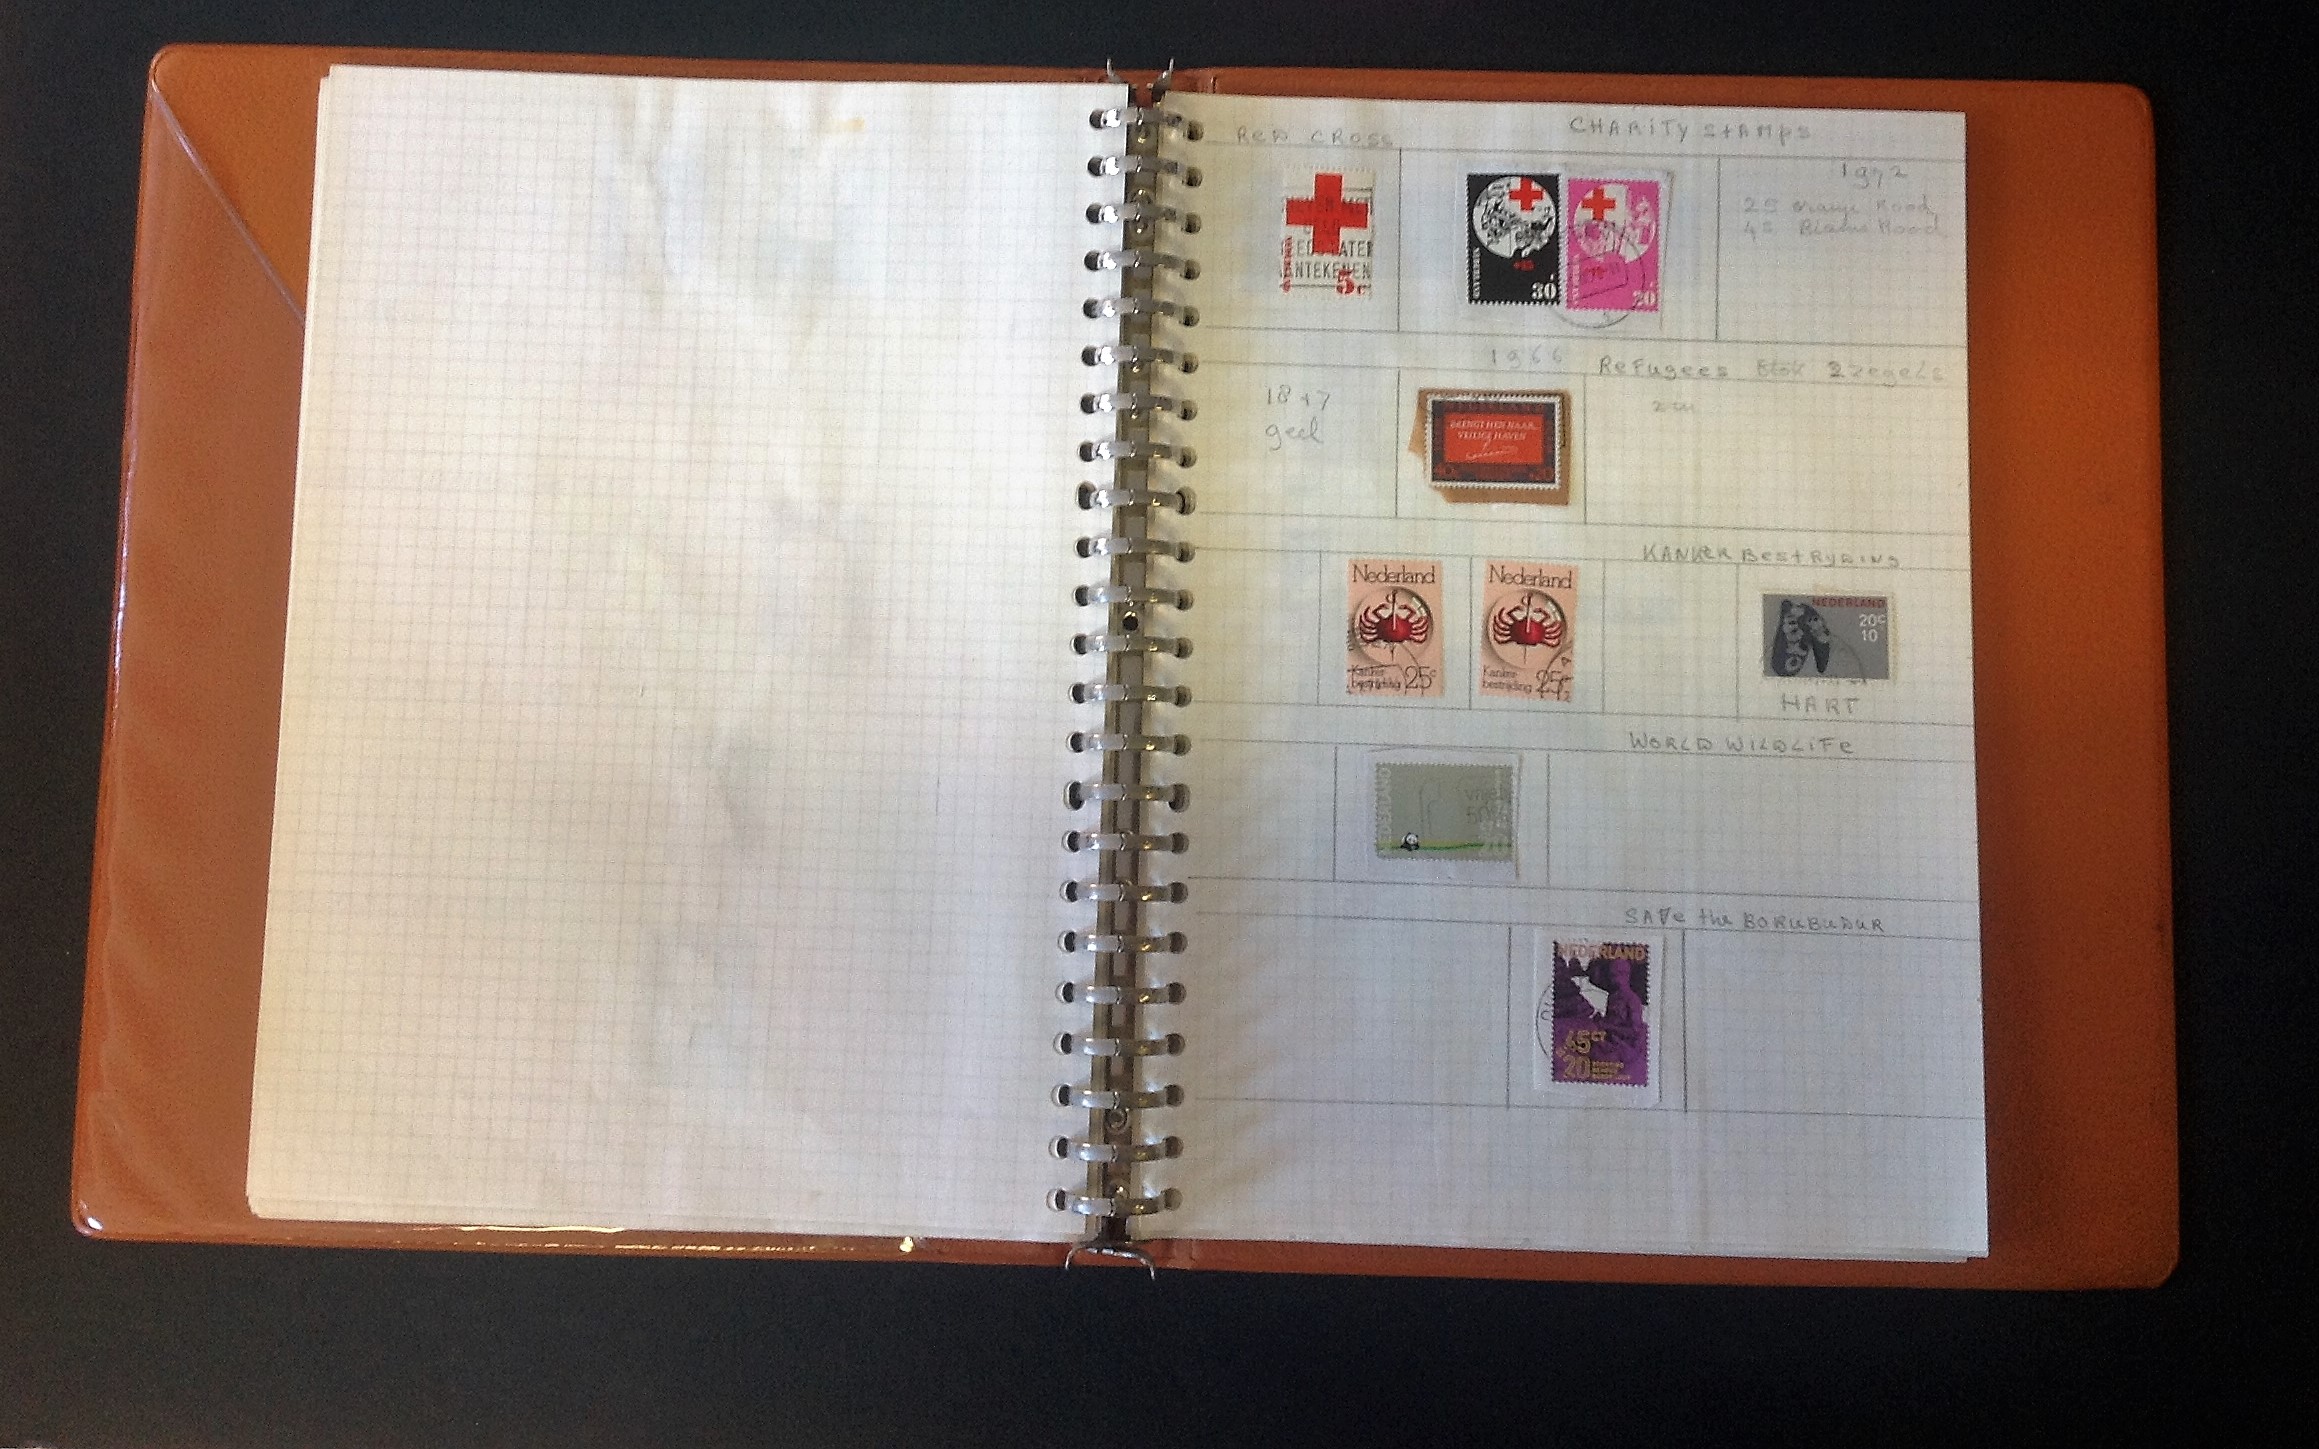 Nederland stamp collection in album. 50 sheets. Mint and used. Good condition. We combine postage on - Image 2 of 7